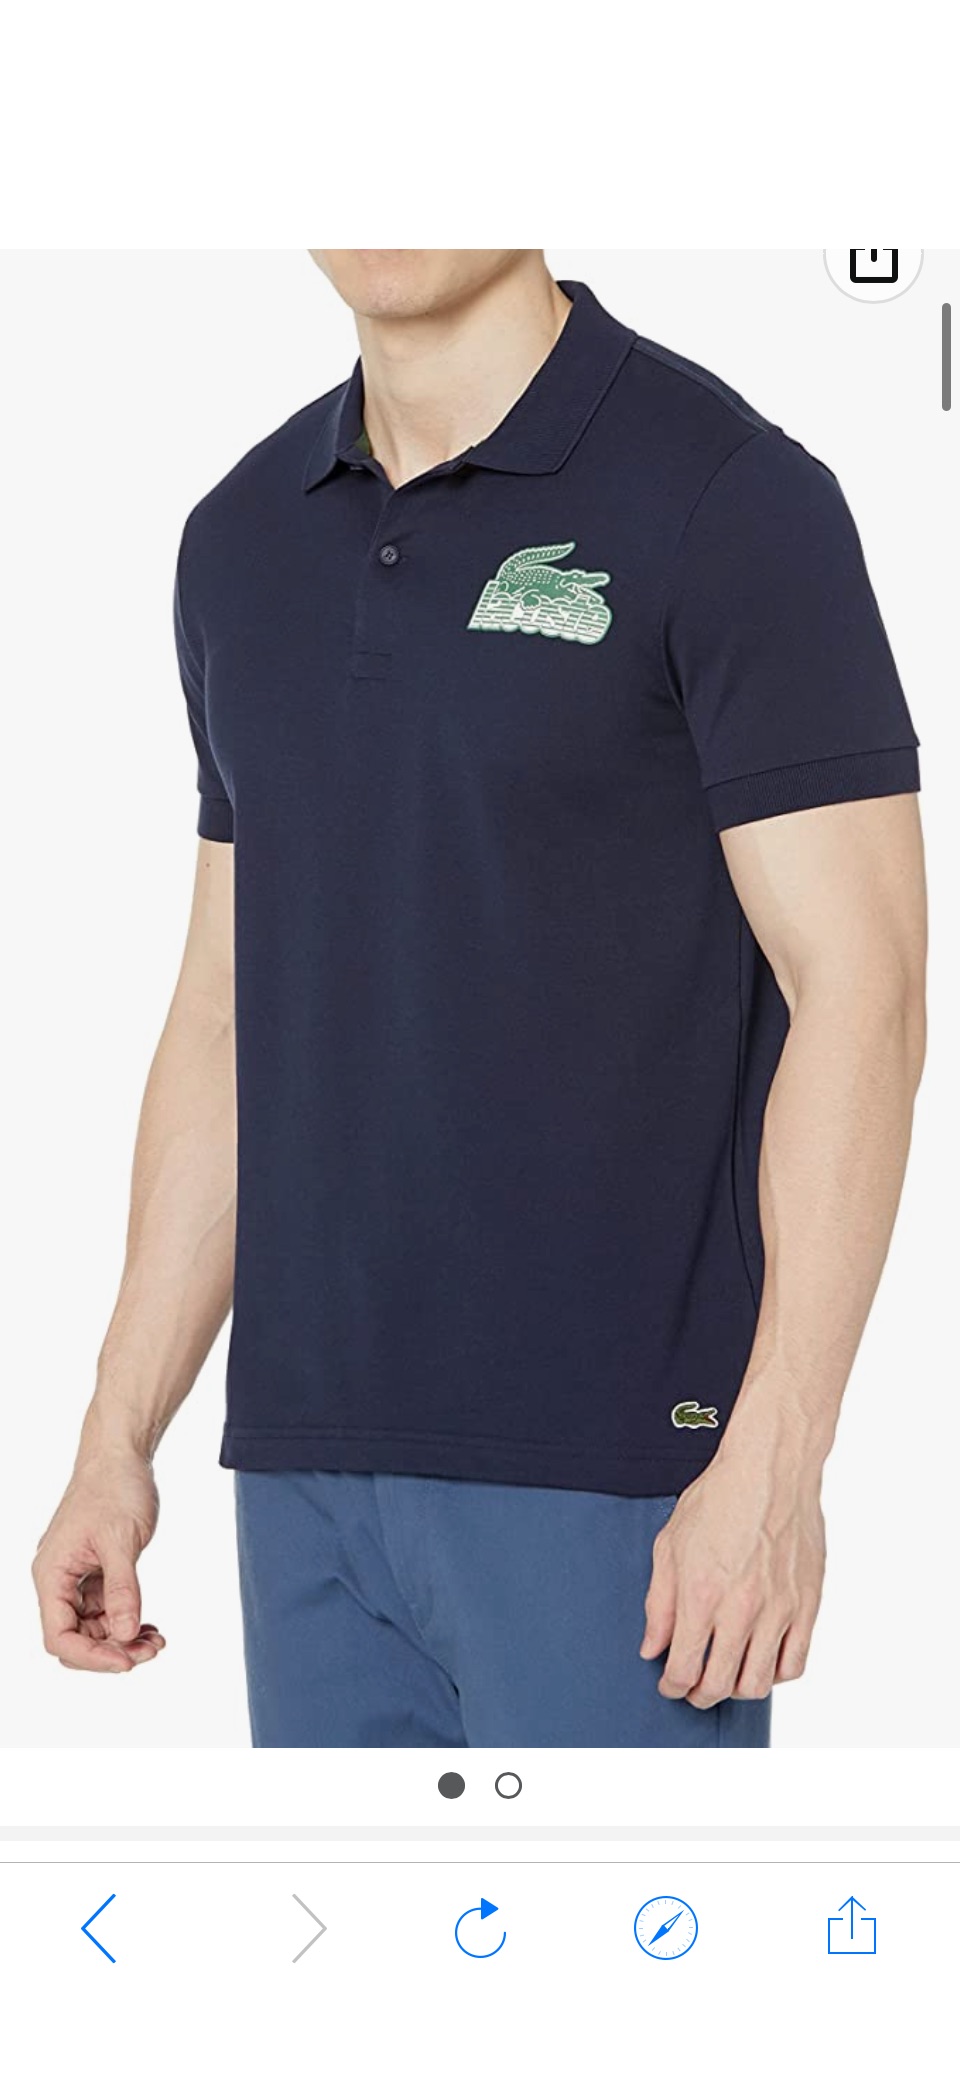 Lacoste Contemporary Collection's Men's Short Sleeve Regular Fit Petit Pique Graphic Polo Shirt, Navy Blue, Small at Amazon Men’s Clothing store原价125